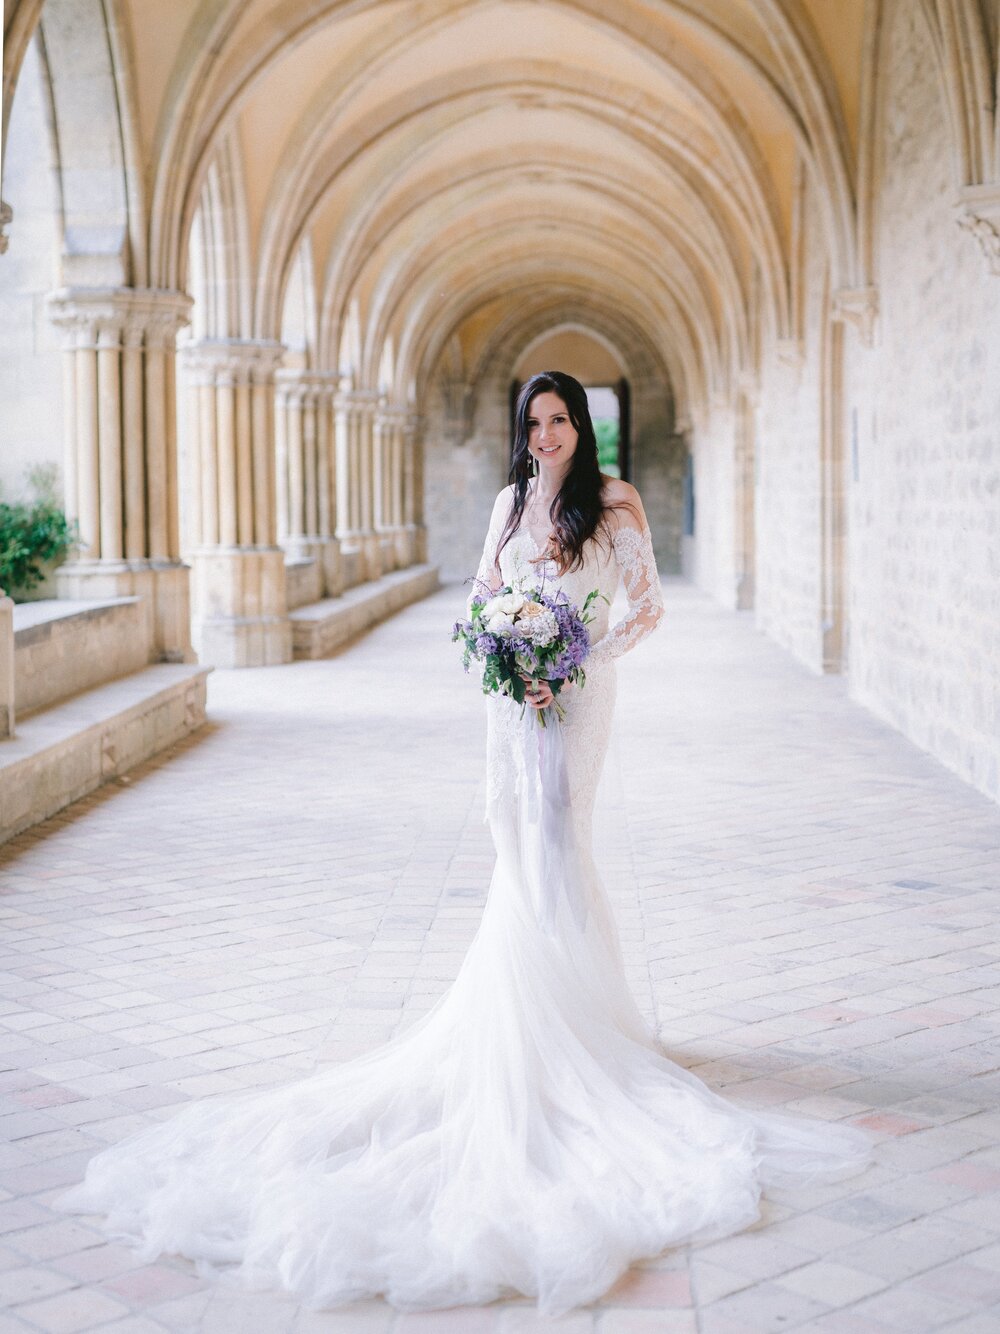  Mallory’s bridal look for her French Destination Château Wedding at Château du Vivier - neutral glamour eyes and peachy lip color with dark brown loose wavy hair, wearing her wispy long sleeved mermaid style wedding dress. Make up applied by english